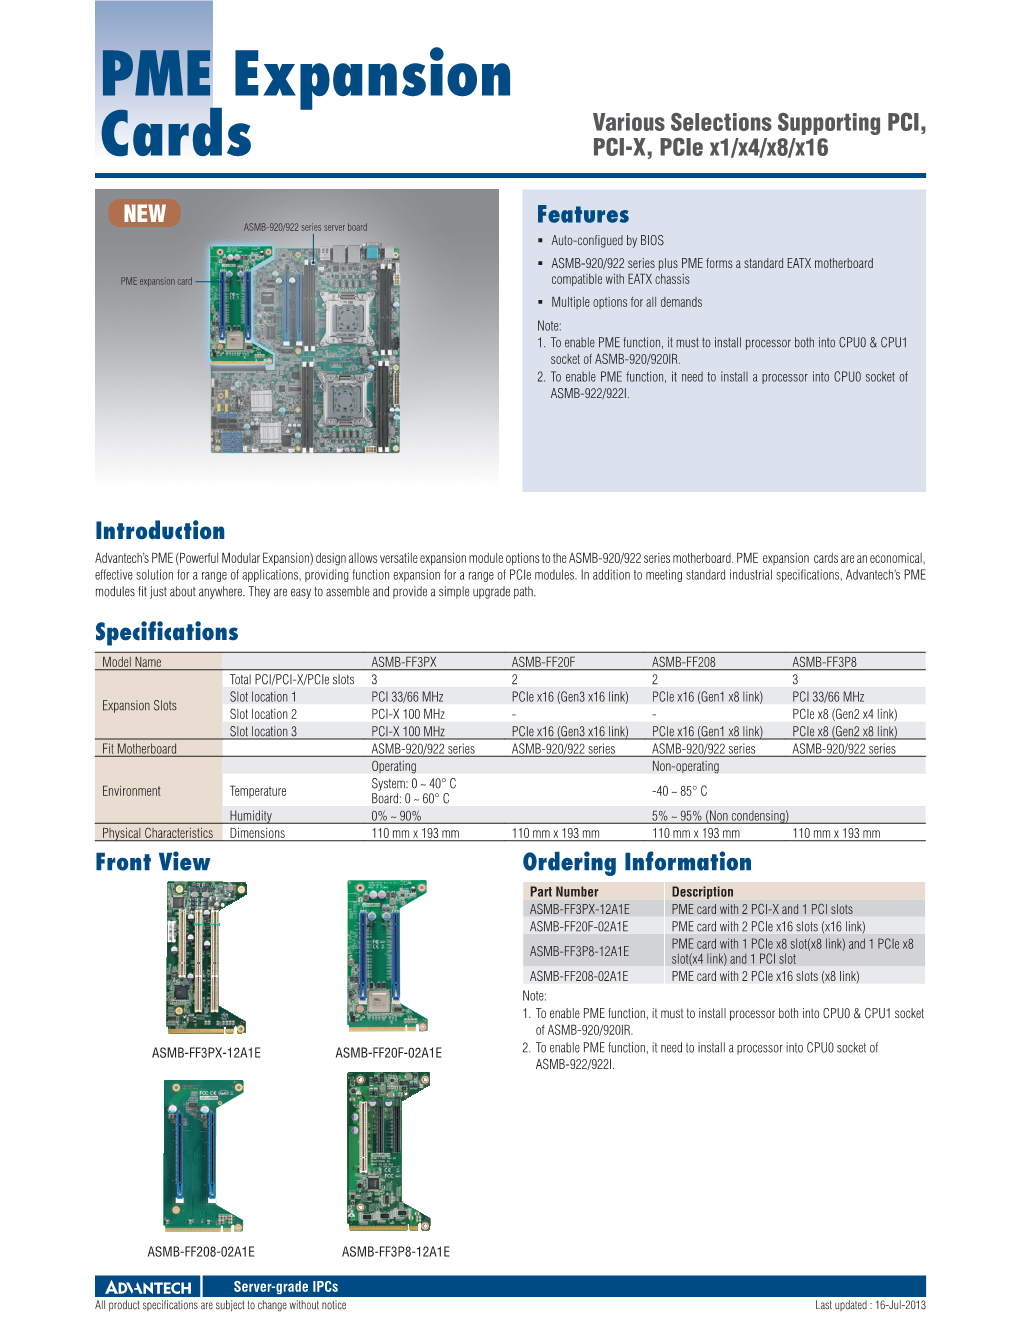 PME Expansion Cards Are an Economical, Effective Solution for a Range of Applications, Providing Function Expansion for a Range of Pcie Modules